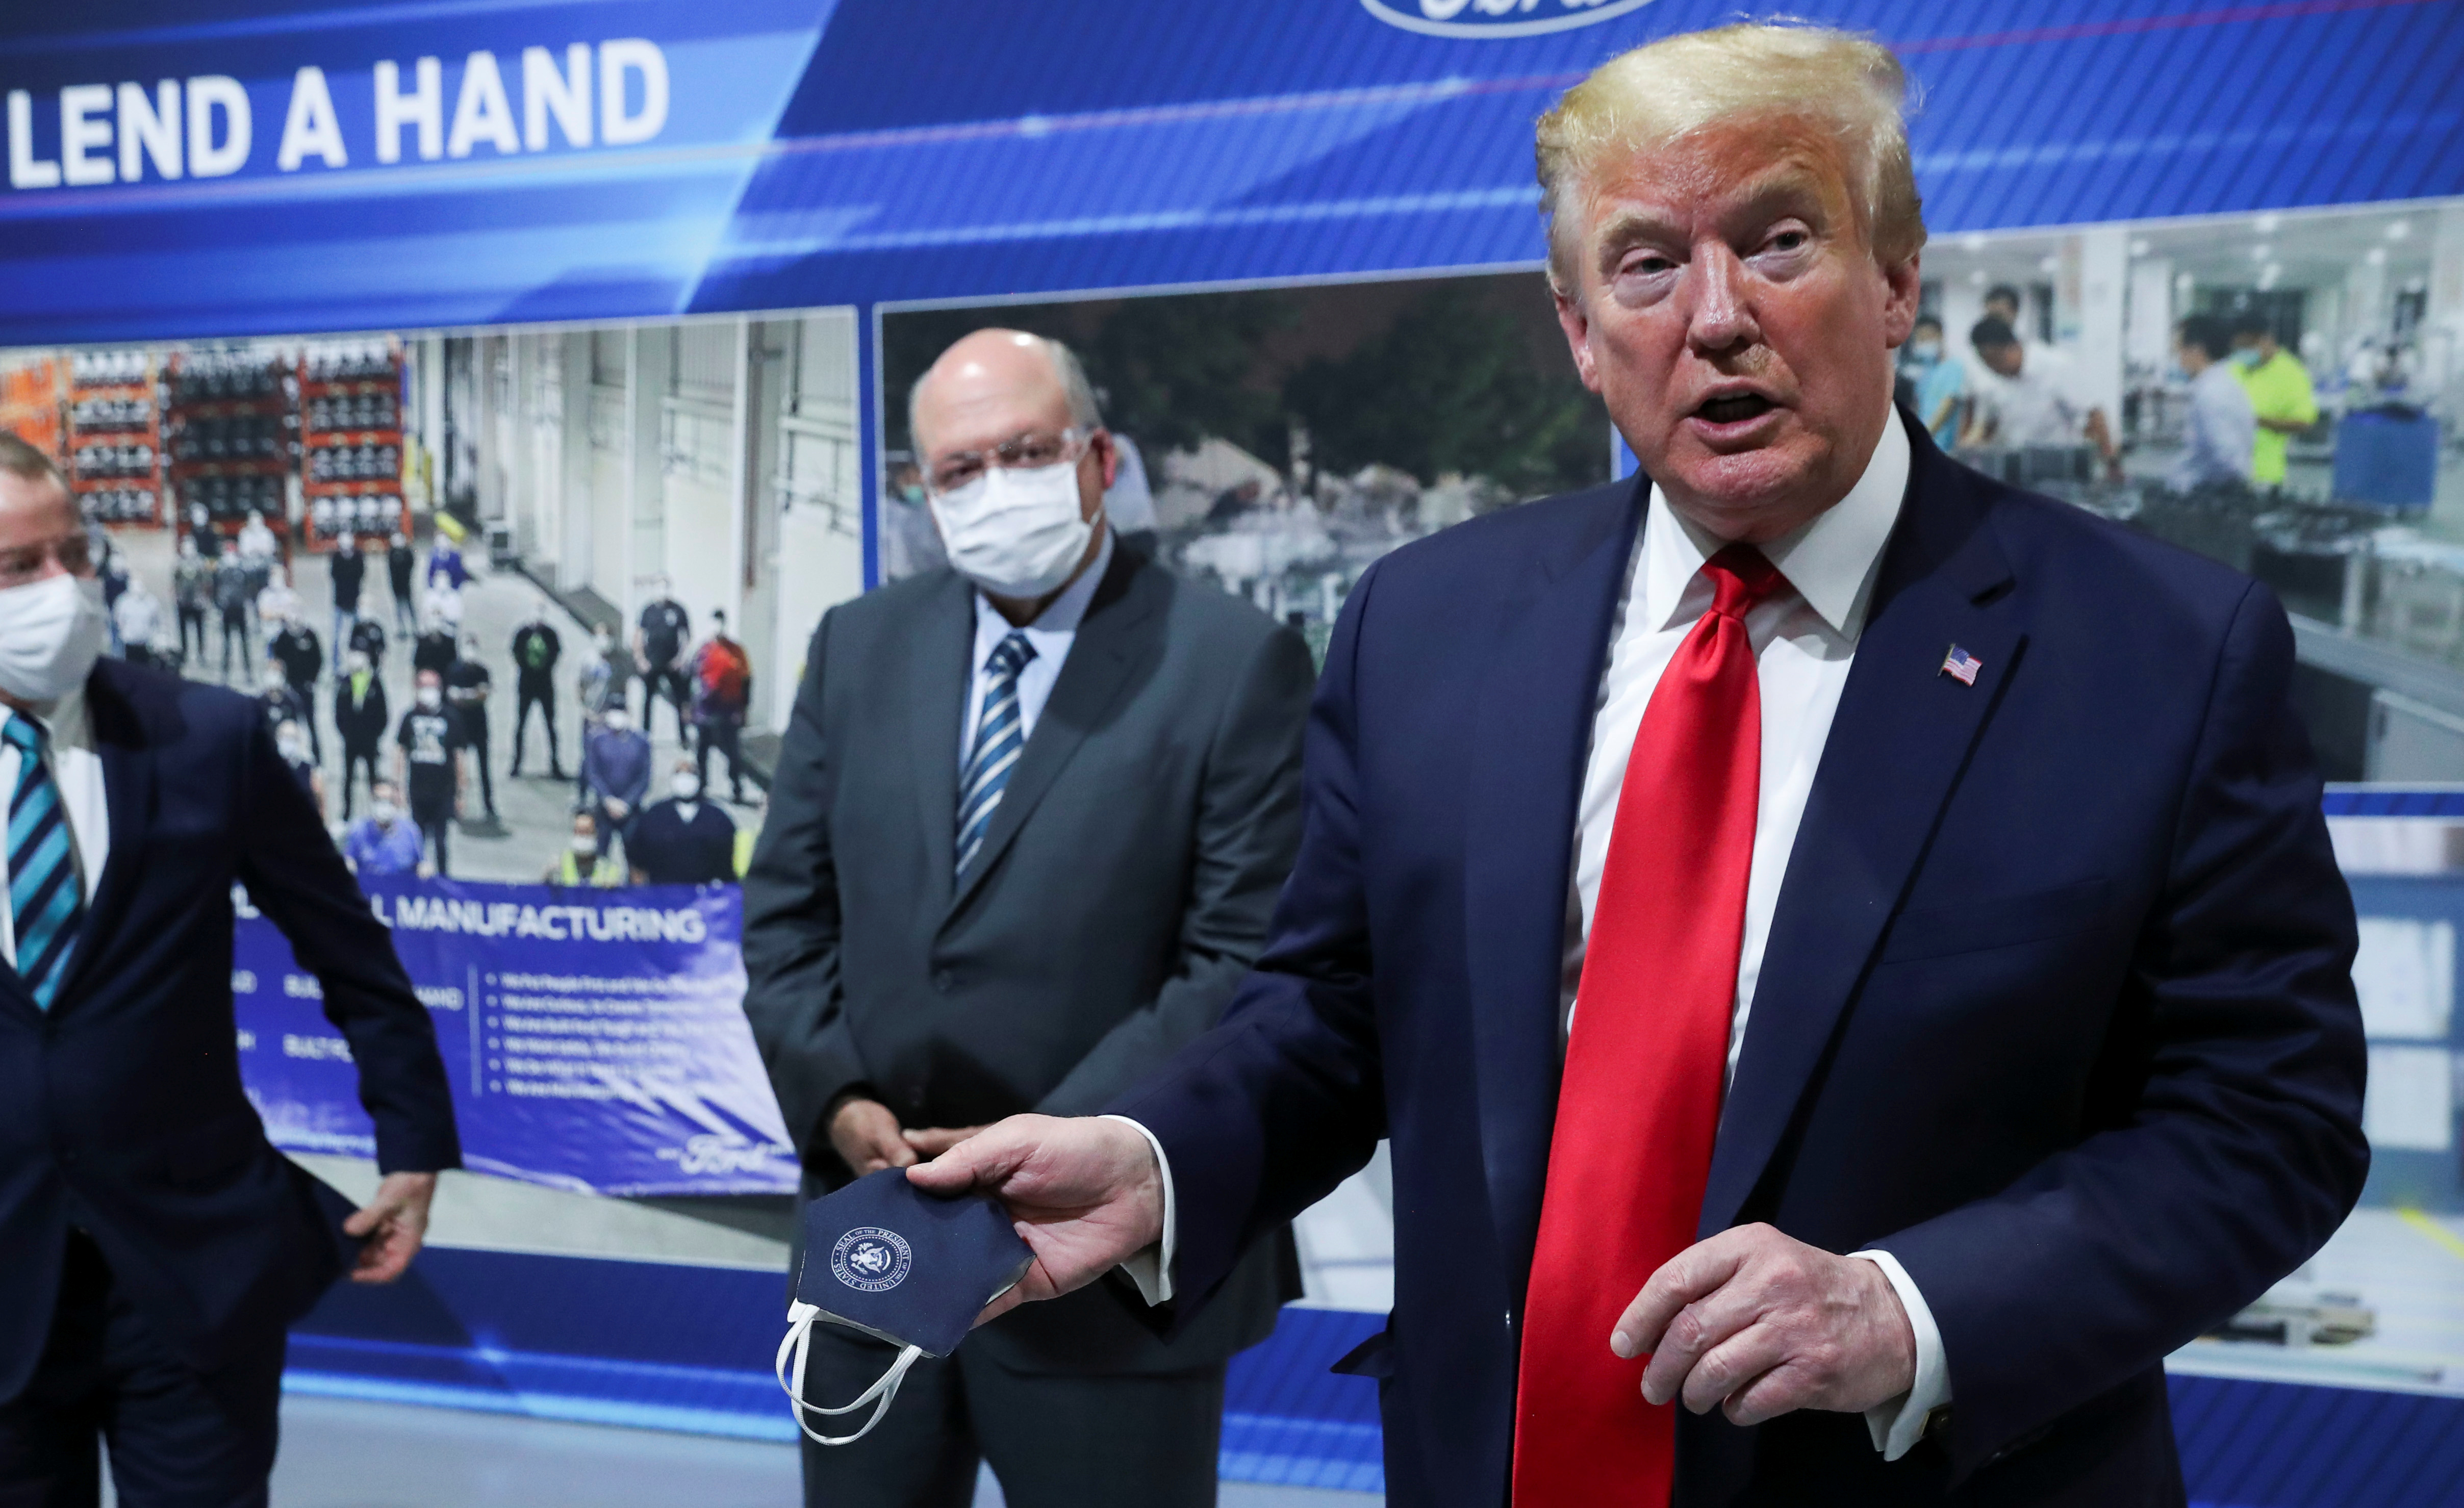 U.S. President Donald Trump holds a protective face mask with a presidential seal on it that he said he had been wearing earlier in his tour as Ford Motor Company CEO Jim Hackett looks on at the Ford Rawsonville Components Plant that is manufacturing ventilators, masks and other medical supplies during the coronavirus disease (COVID-19) pandemic in Ypsilanti, Michigan, U.S., May 21, 2020. REUTERS/Leah Millis